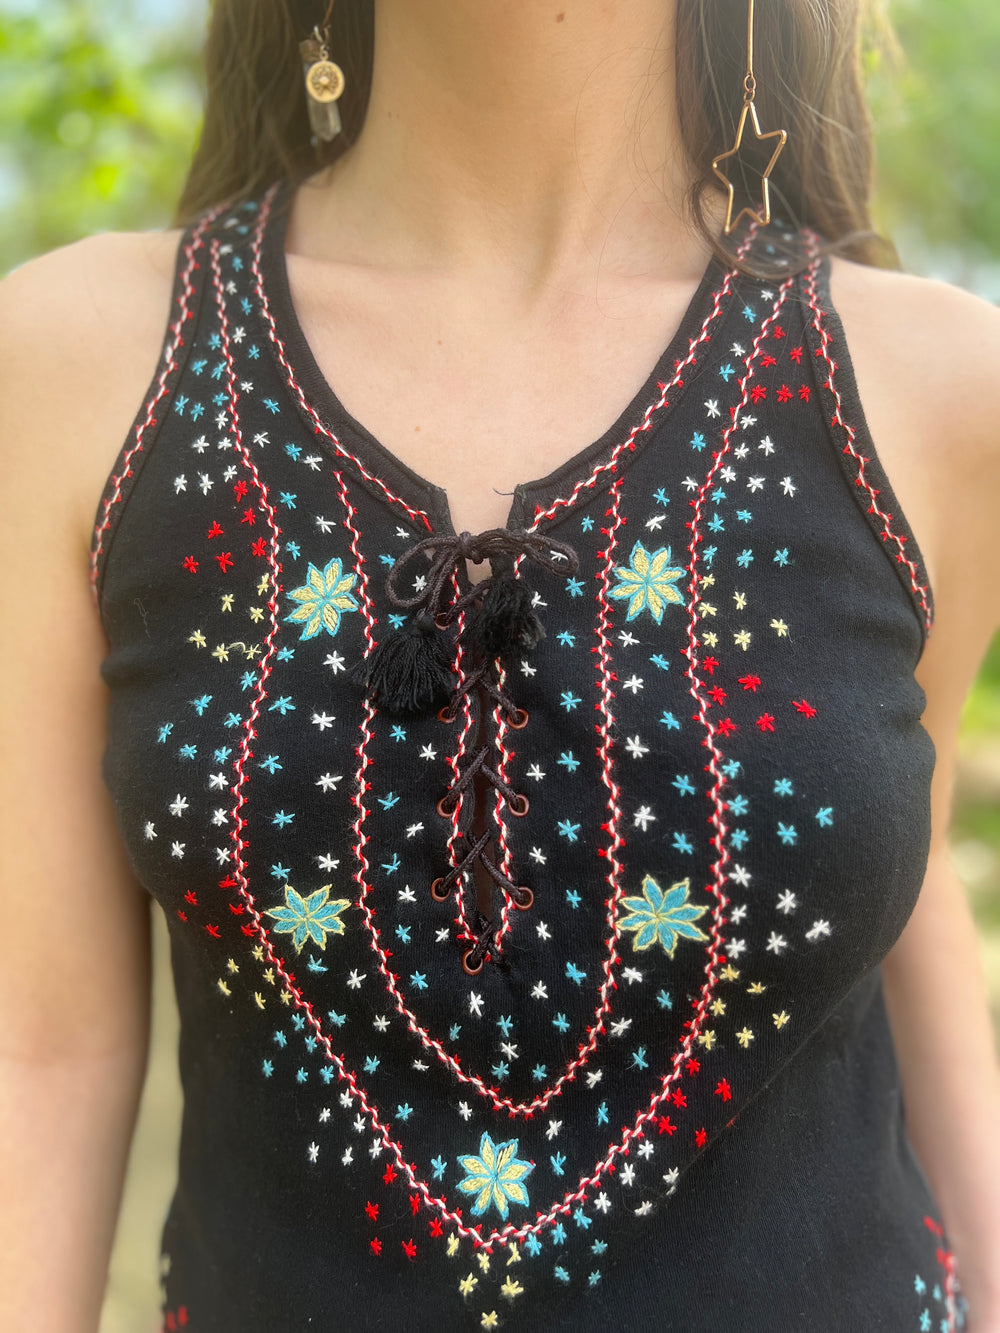 70s Vintage Black Embroidered Cotton Knit Tank Top